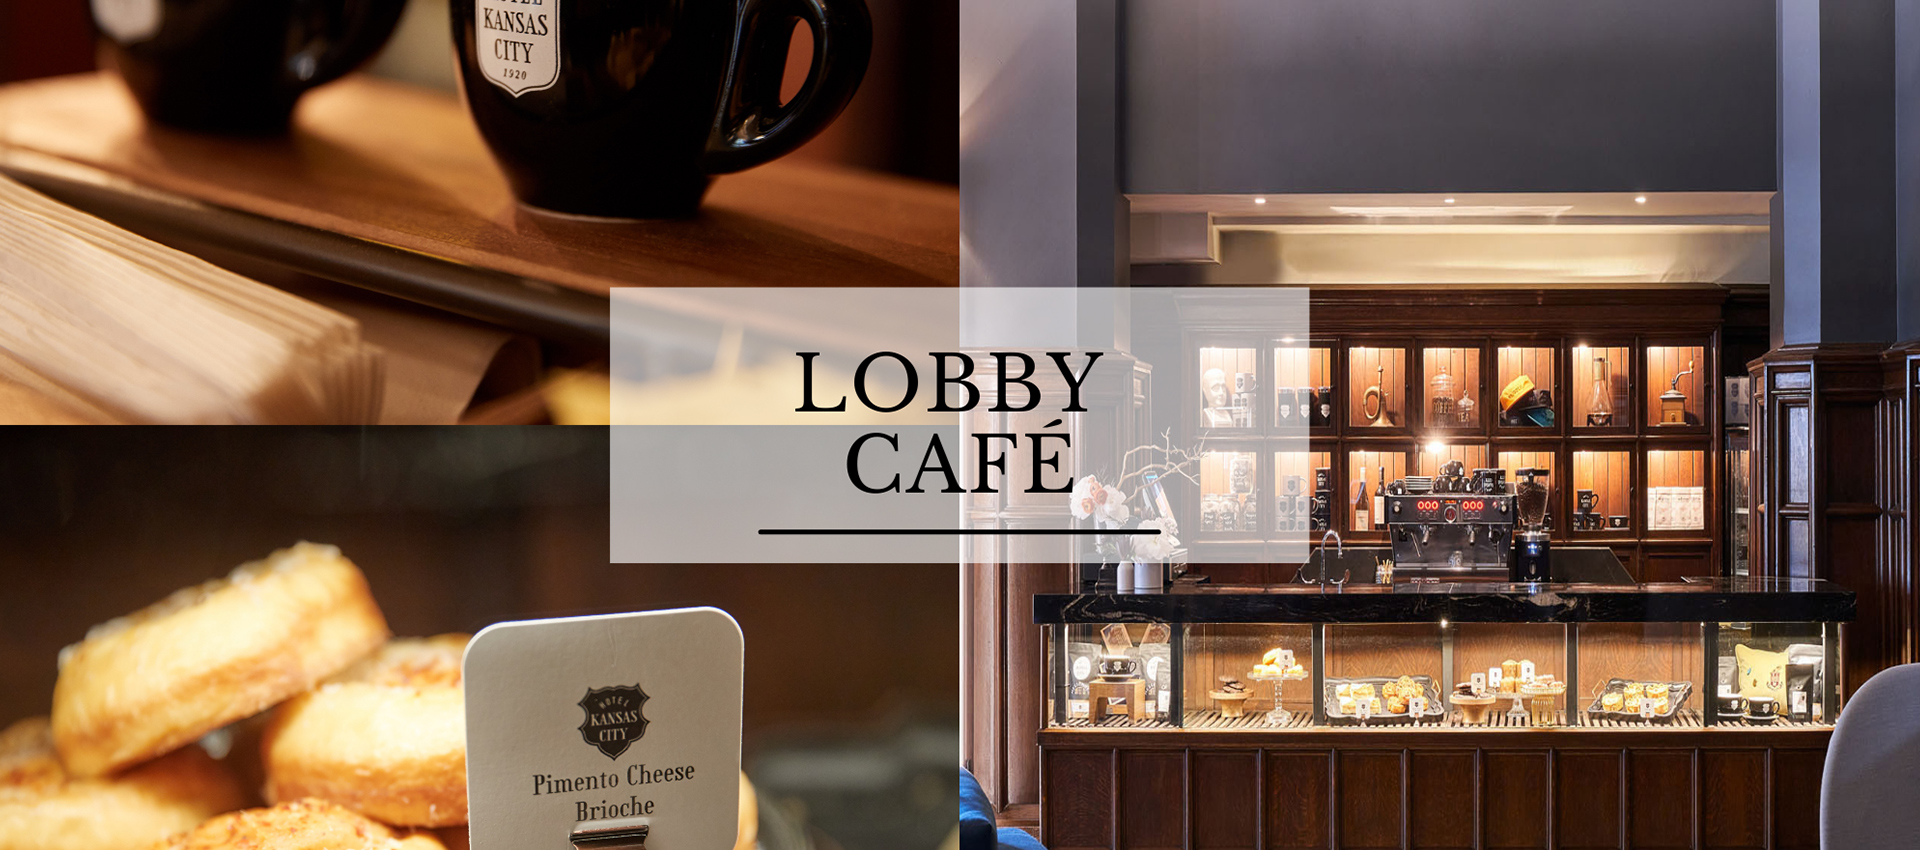 Lobby Café Coffee and Bakery Offerings.